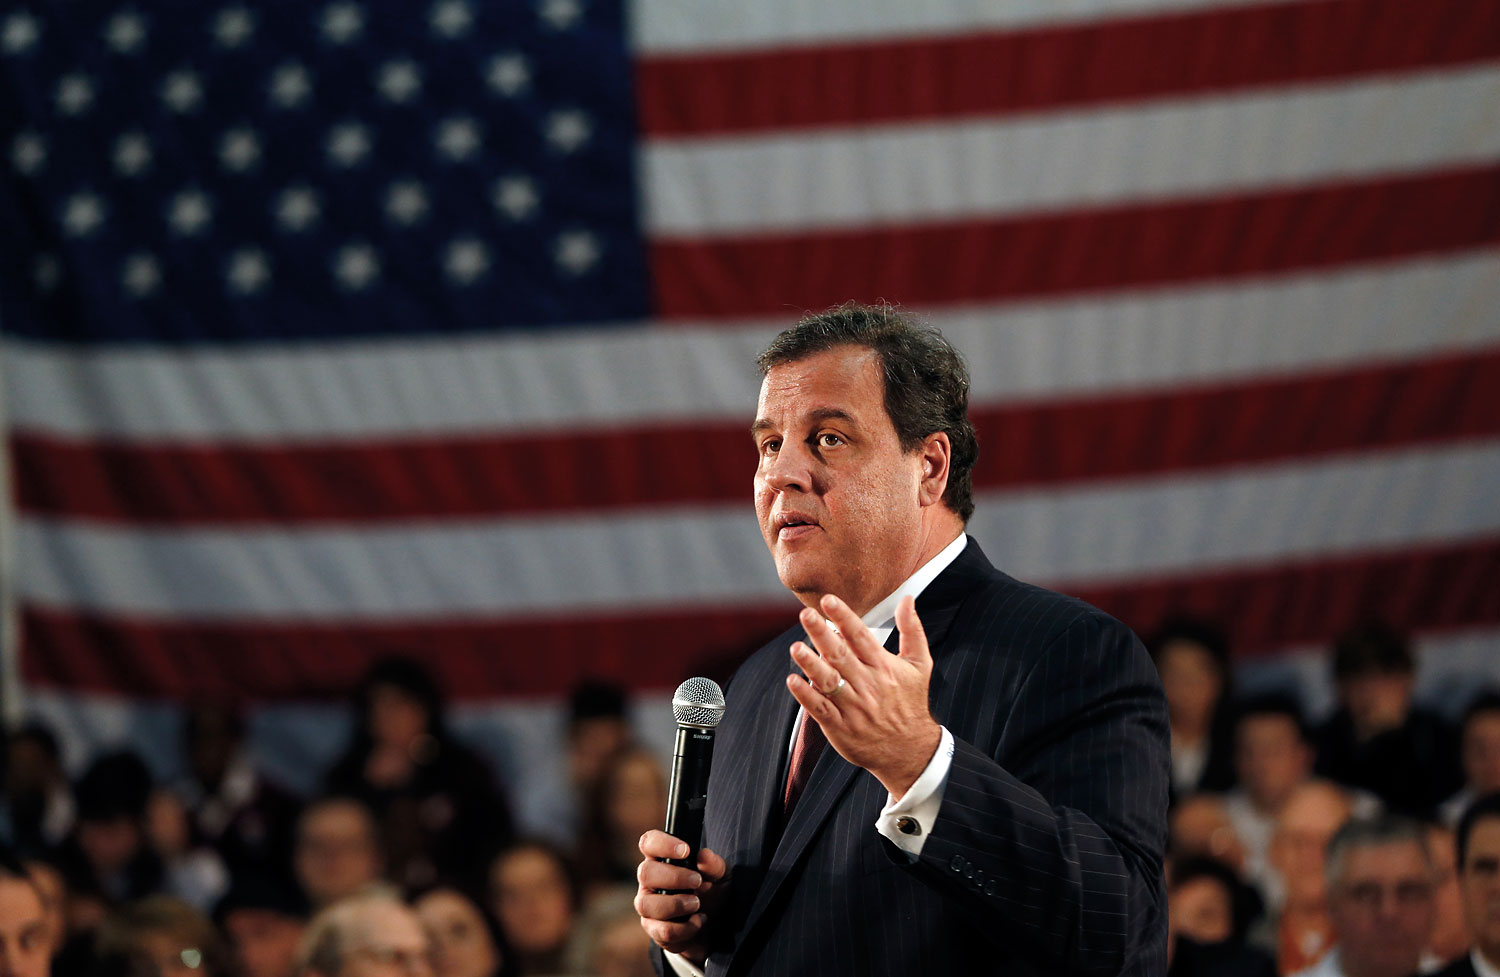 New Jersey Gov. Chris Christie at a town hall meeting at Winston Churchill Elementary School, April 9, 2014, in Fairfield, N.J. (Julio Cortez—AP)